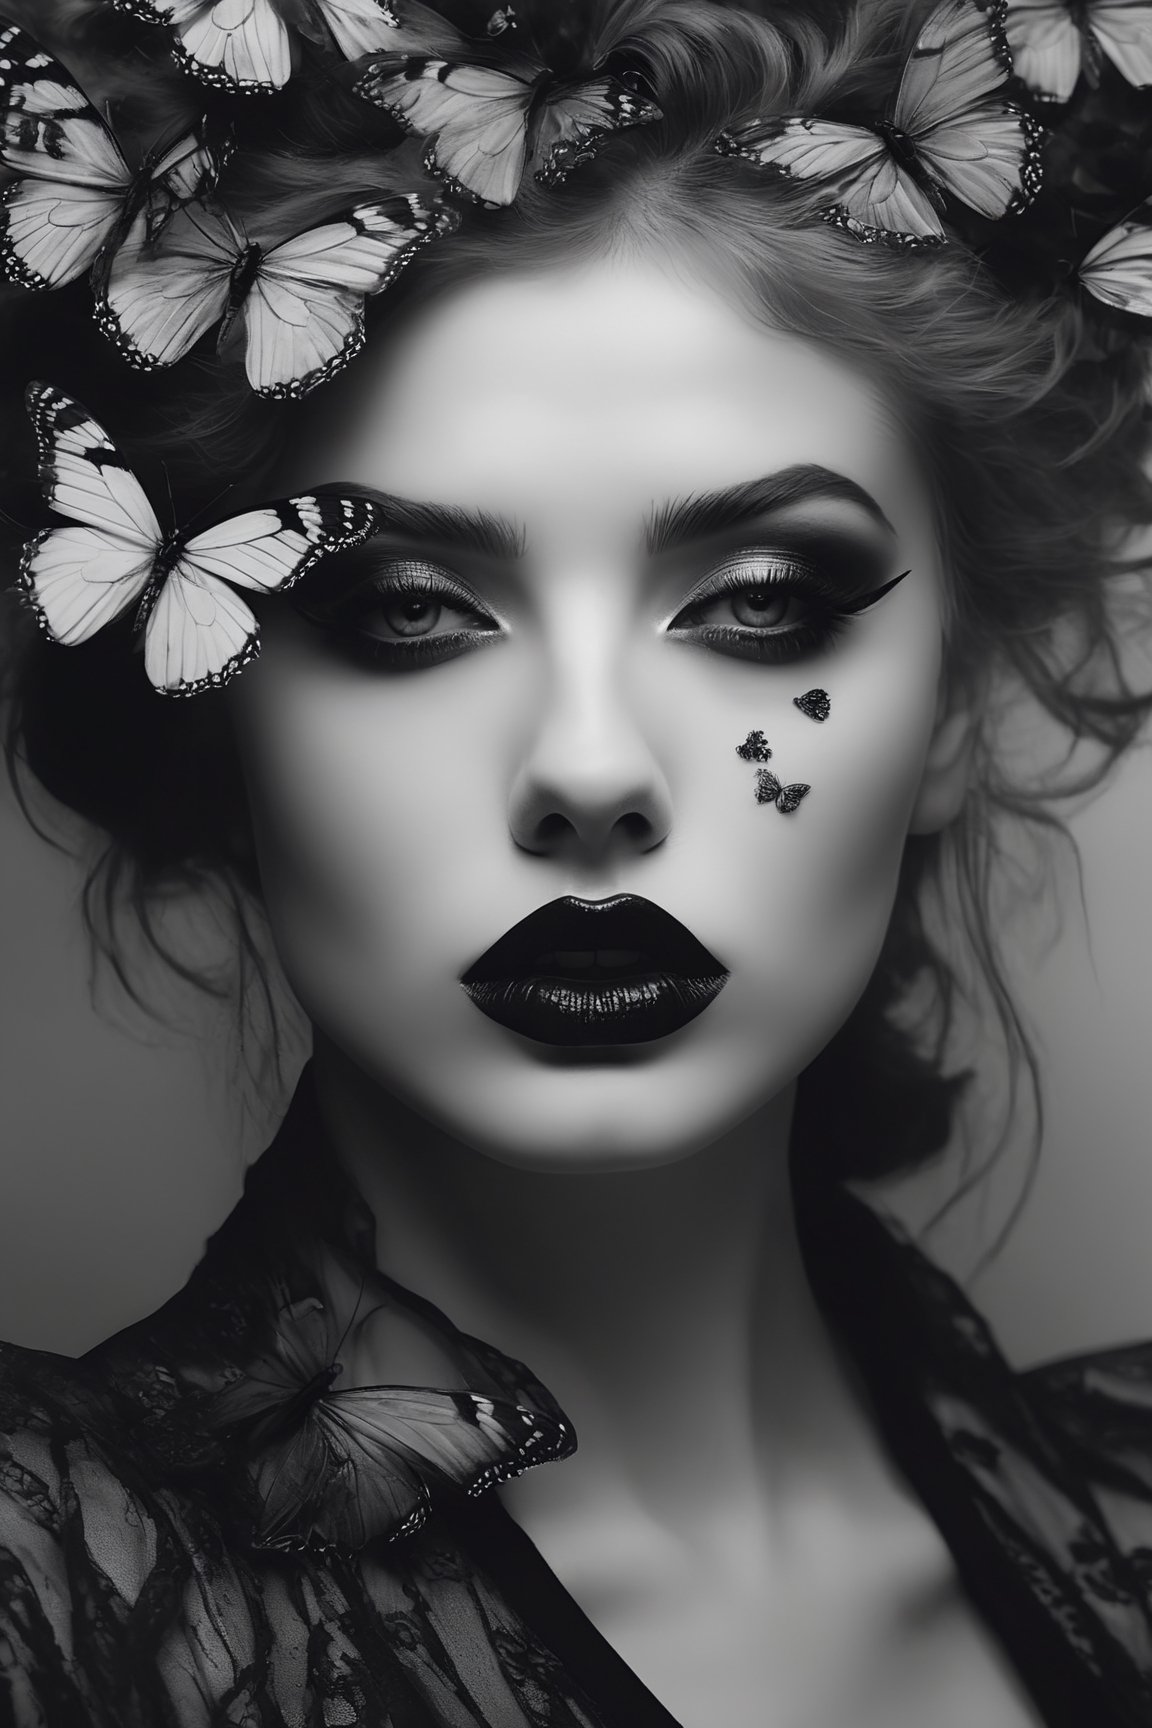  Create a hyper realistic monochrome photo of goth women from the waist up gazing in to the viewer soul.her mouth is covered by colourful butterfly while everything elese is in black and white, sentimental mood.,photo r3al,photorealistic,realistic